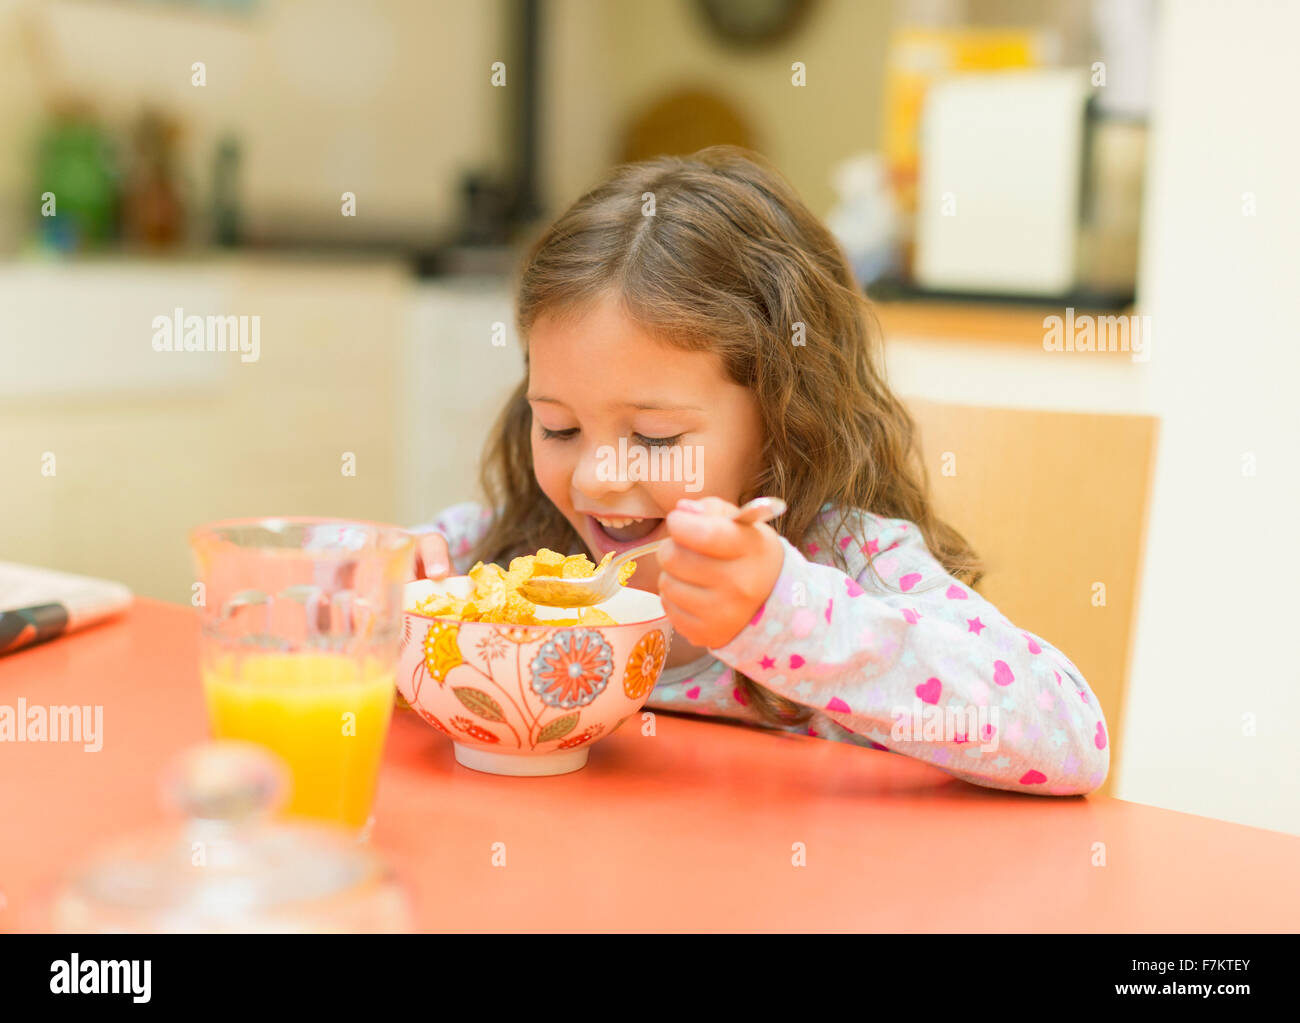 Girl eating cereal at breakfast table Stock Photo